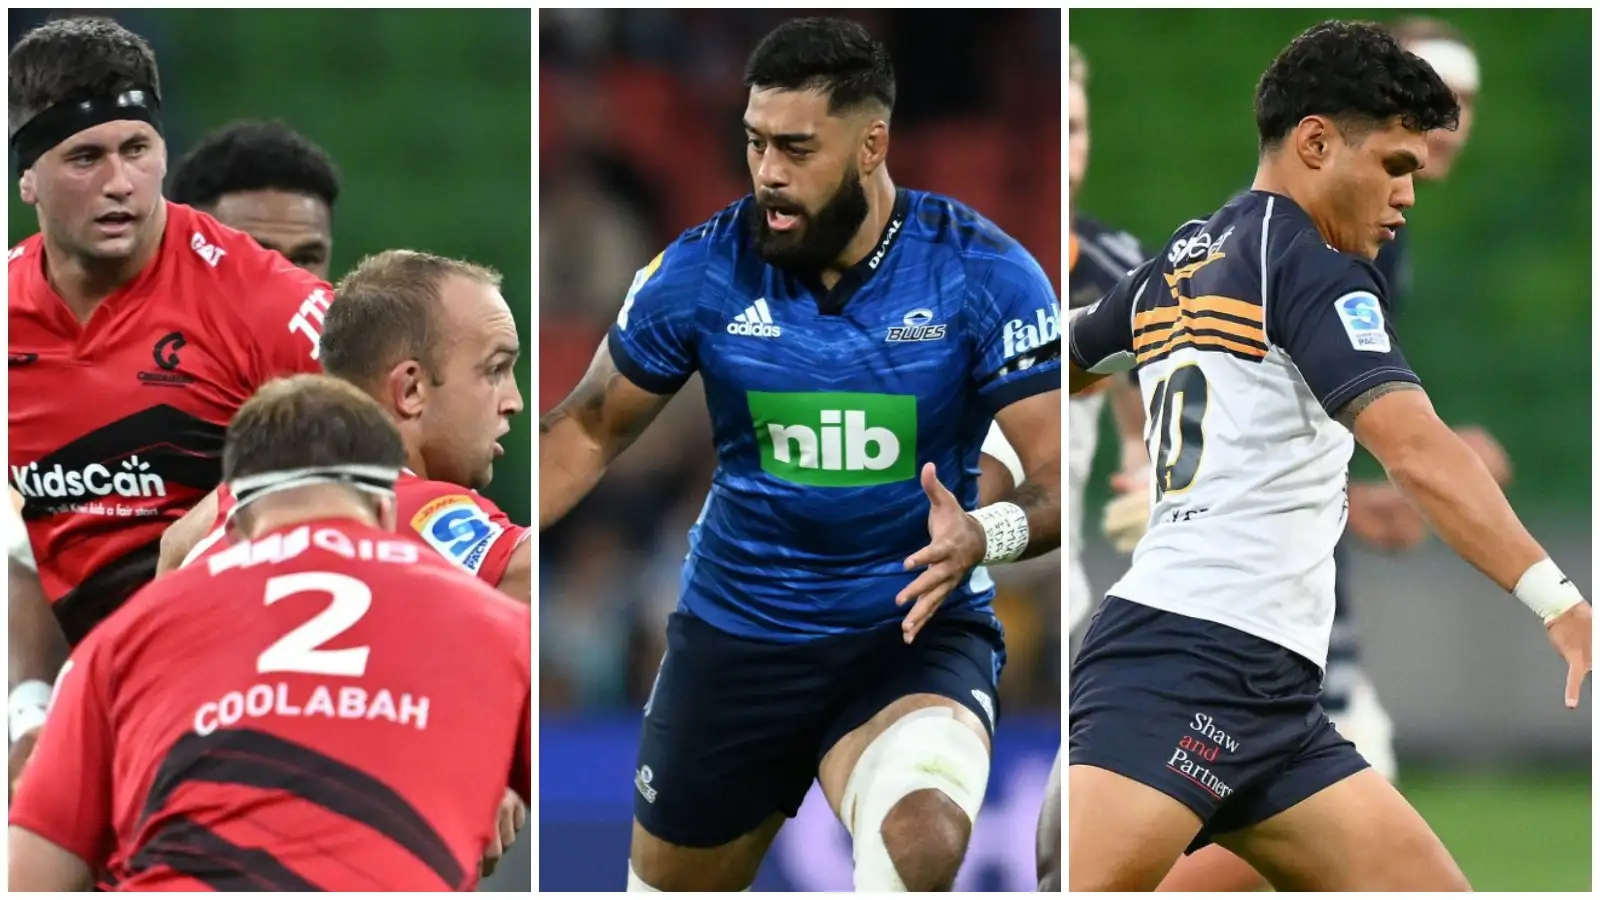 Five storylines ahead of the Super Rugby Pacific round including the champions feeling the heat